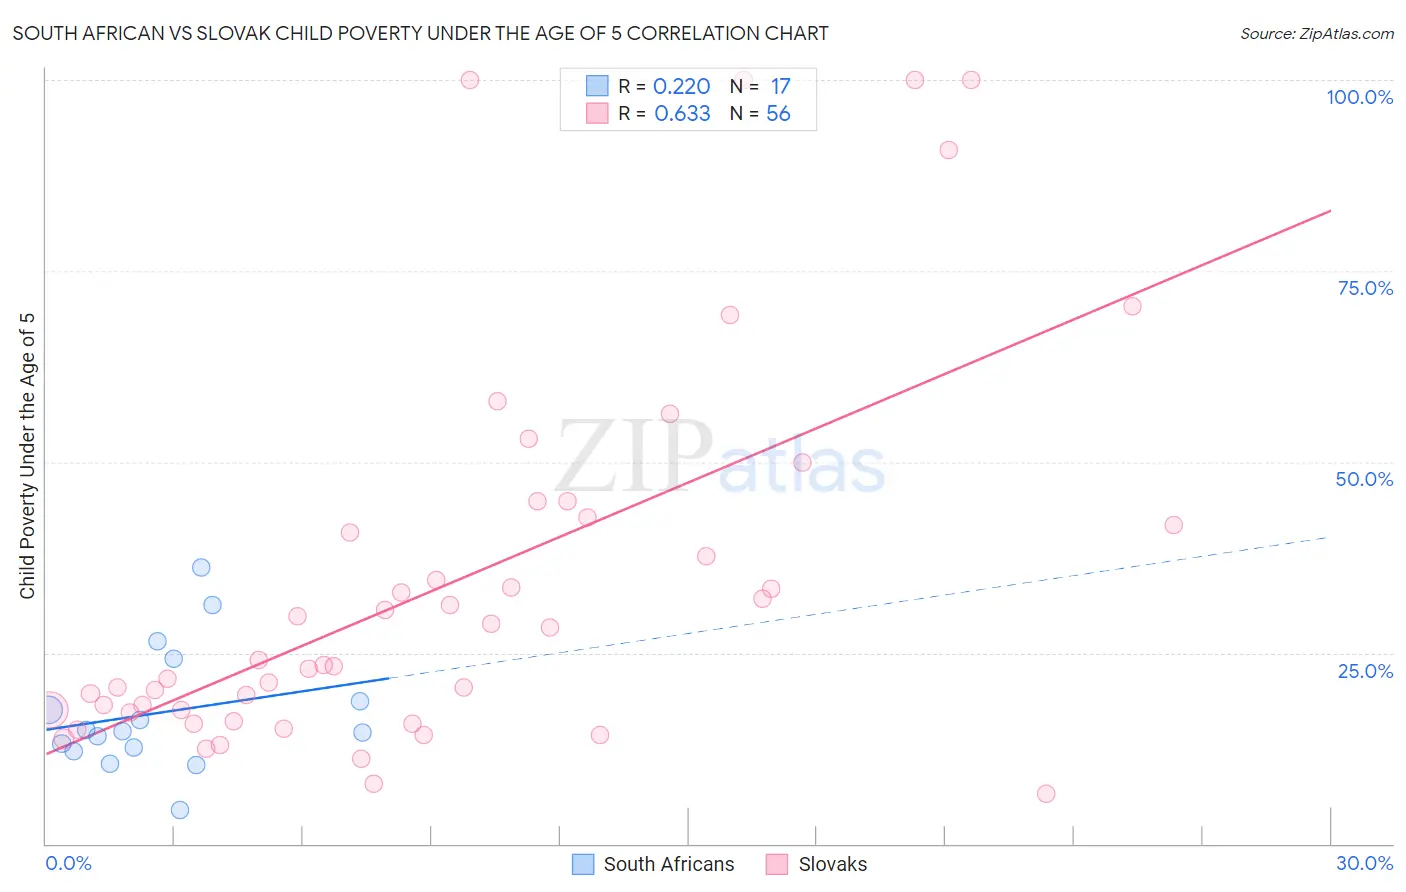 South African vs Slovak Child Poverty Under the Age of 5